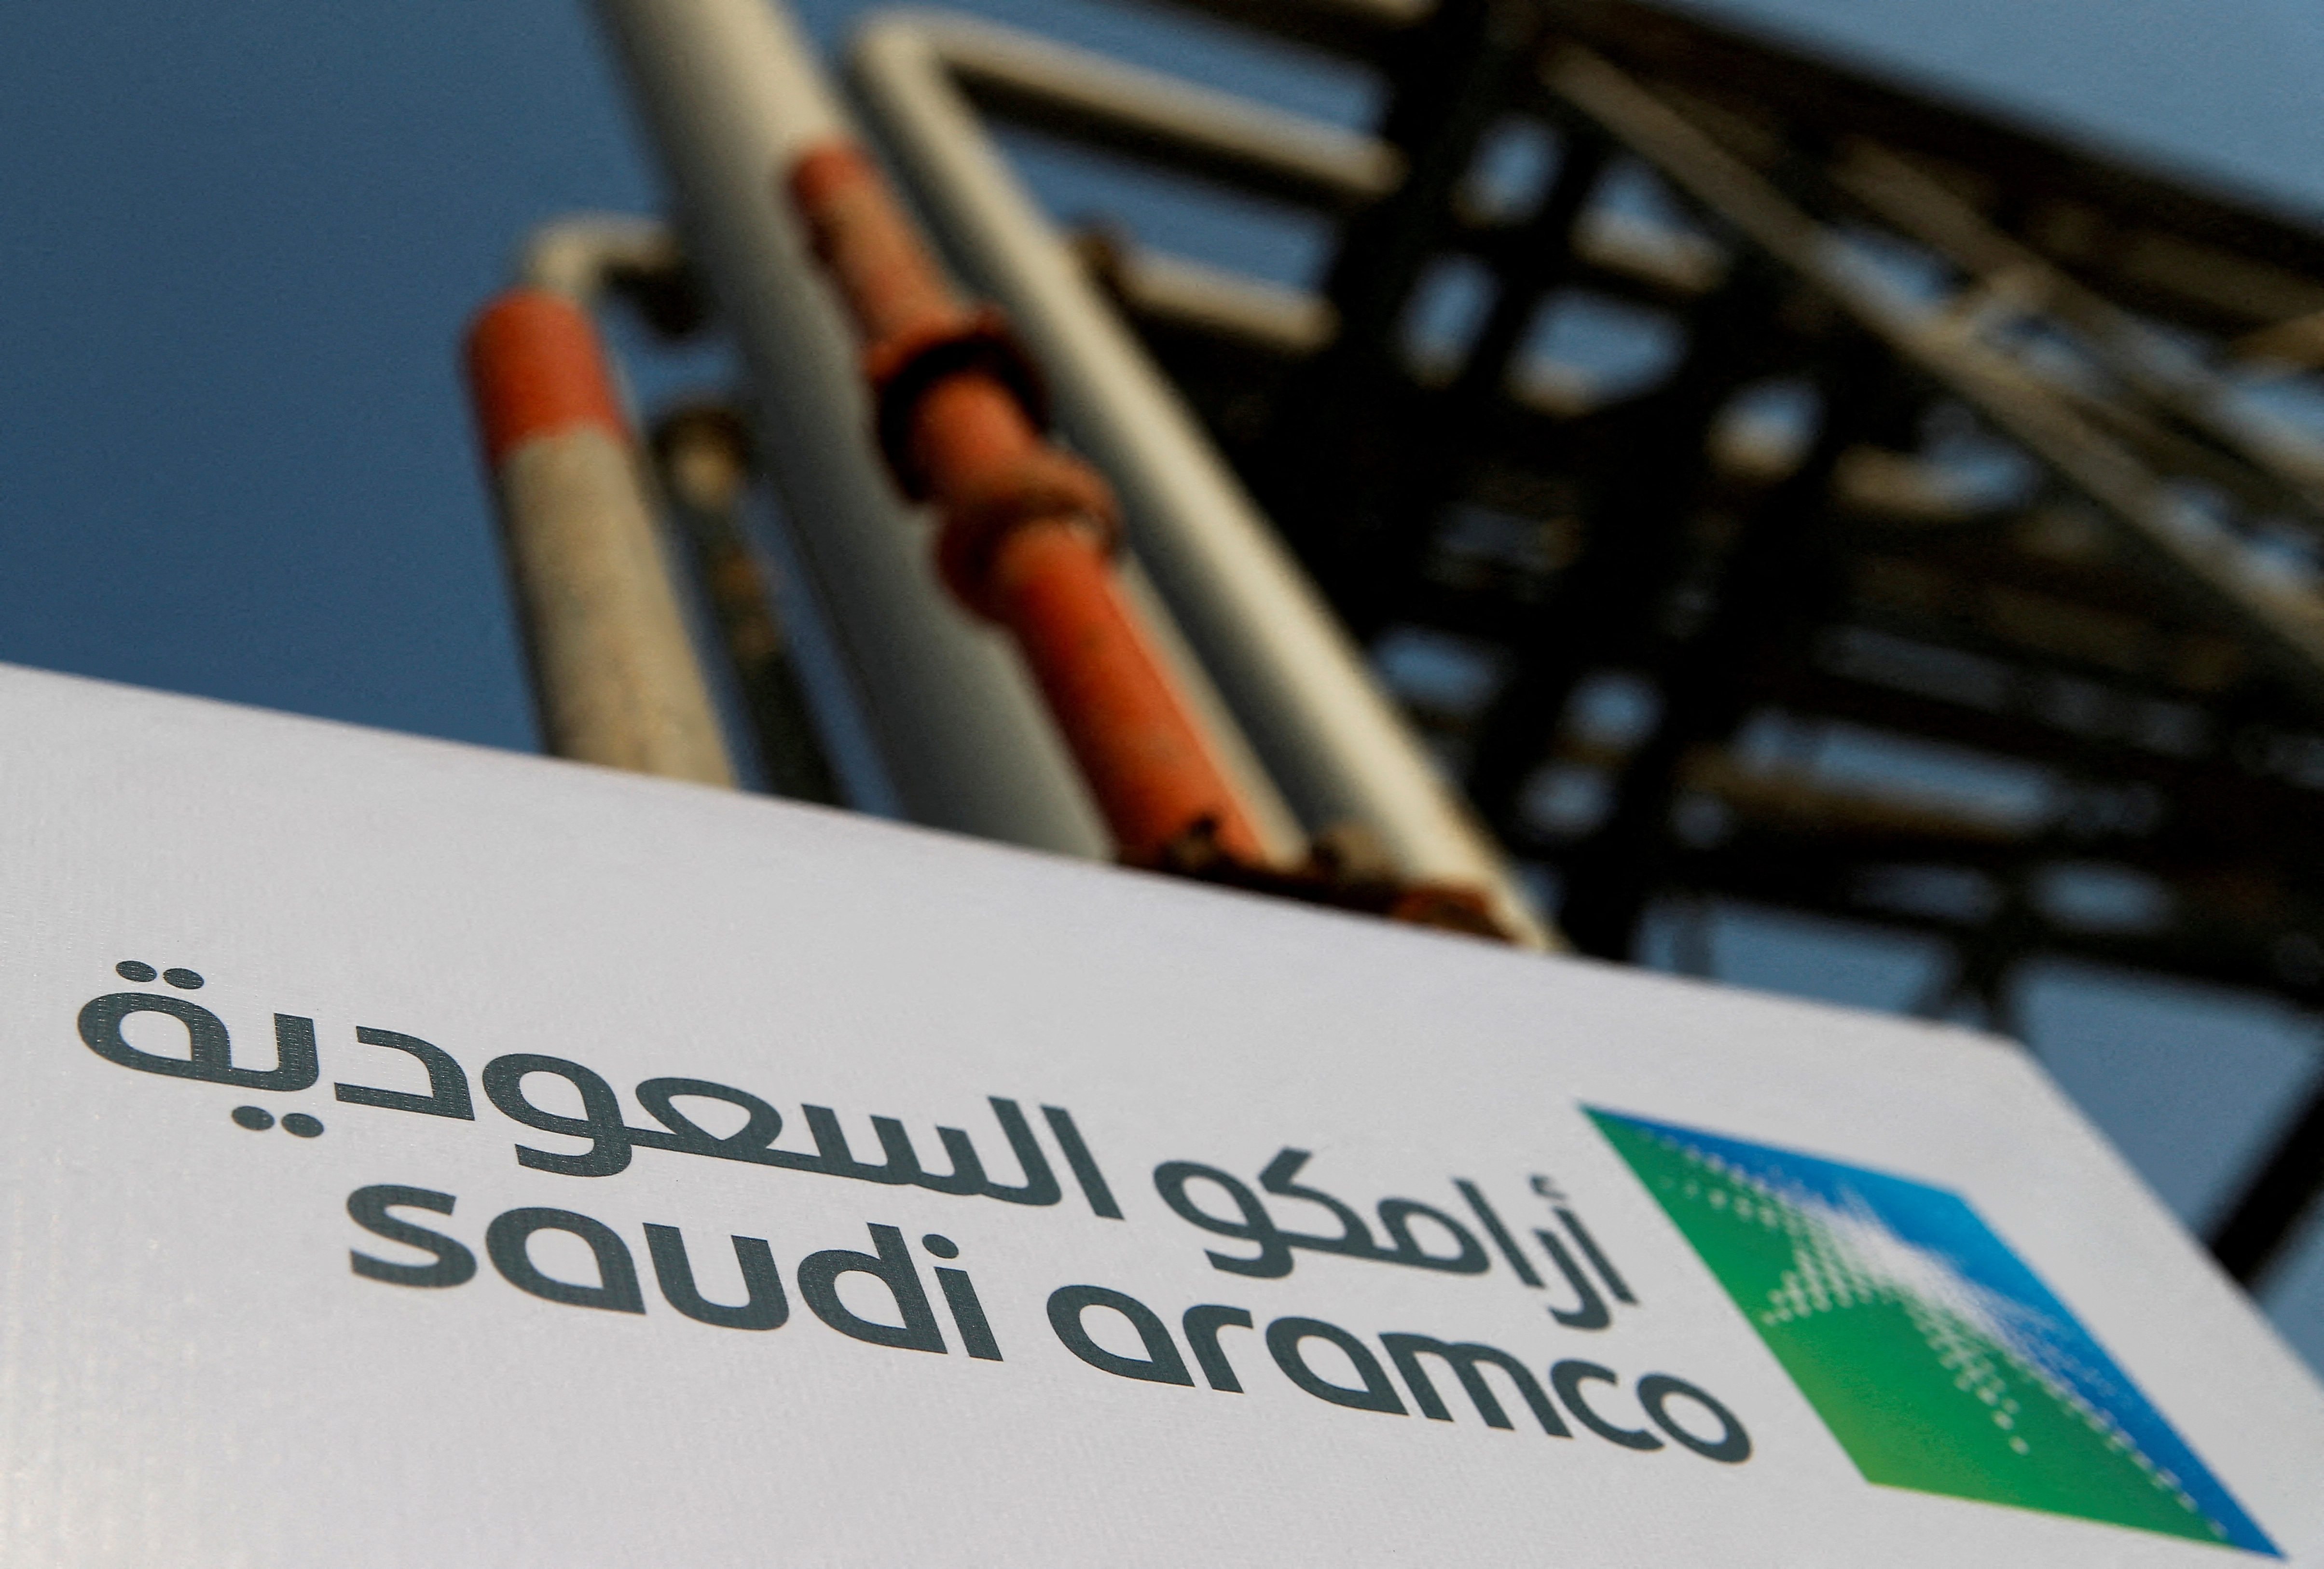 A Saudi Aramco sign is pictured at an oil facility in Abqaiq